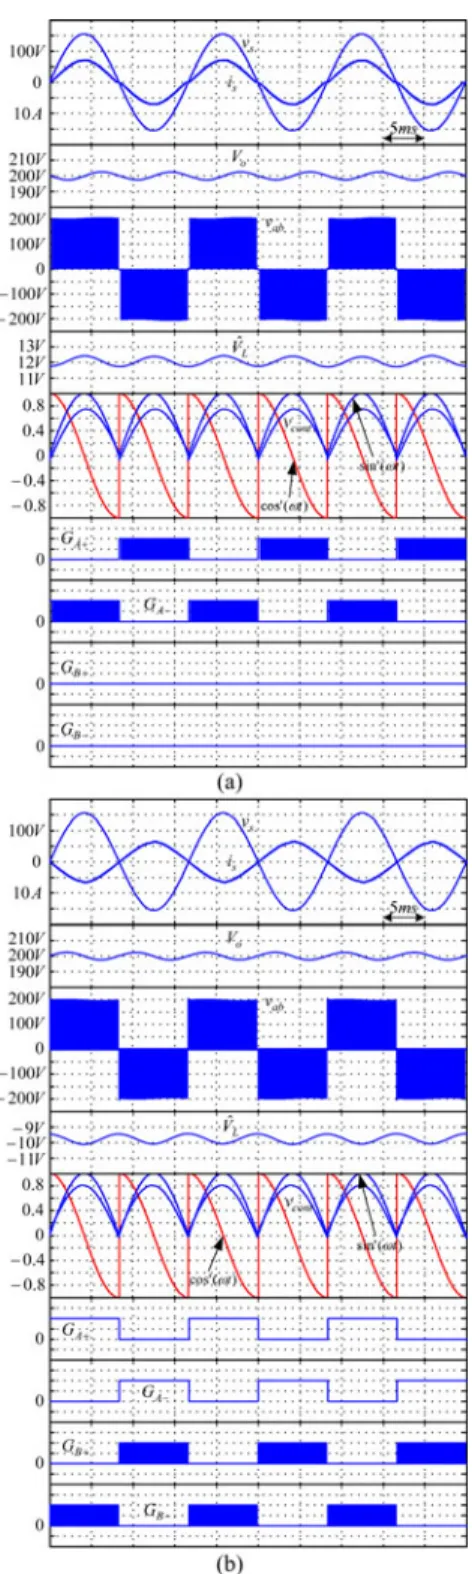 Fig. 10. Simulation results with distorted input voltage (a) in the rectifier mode with the average power ≈530 W (i.e., I c c = 0 A), (b) in the inverter mode